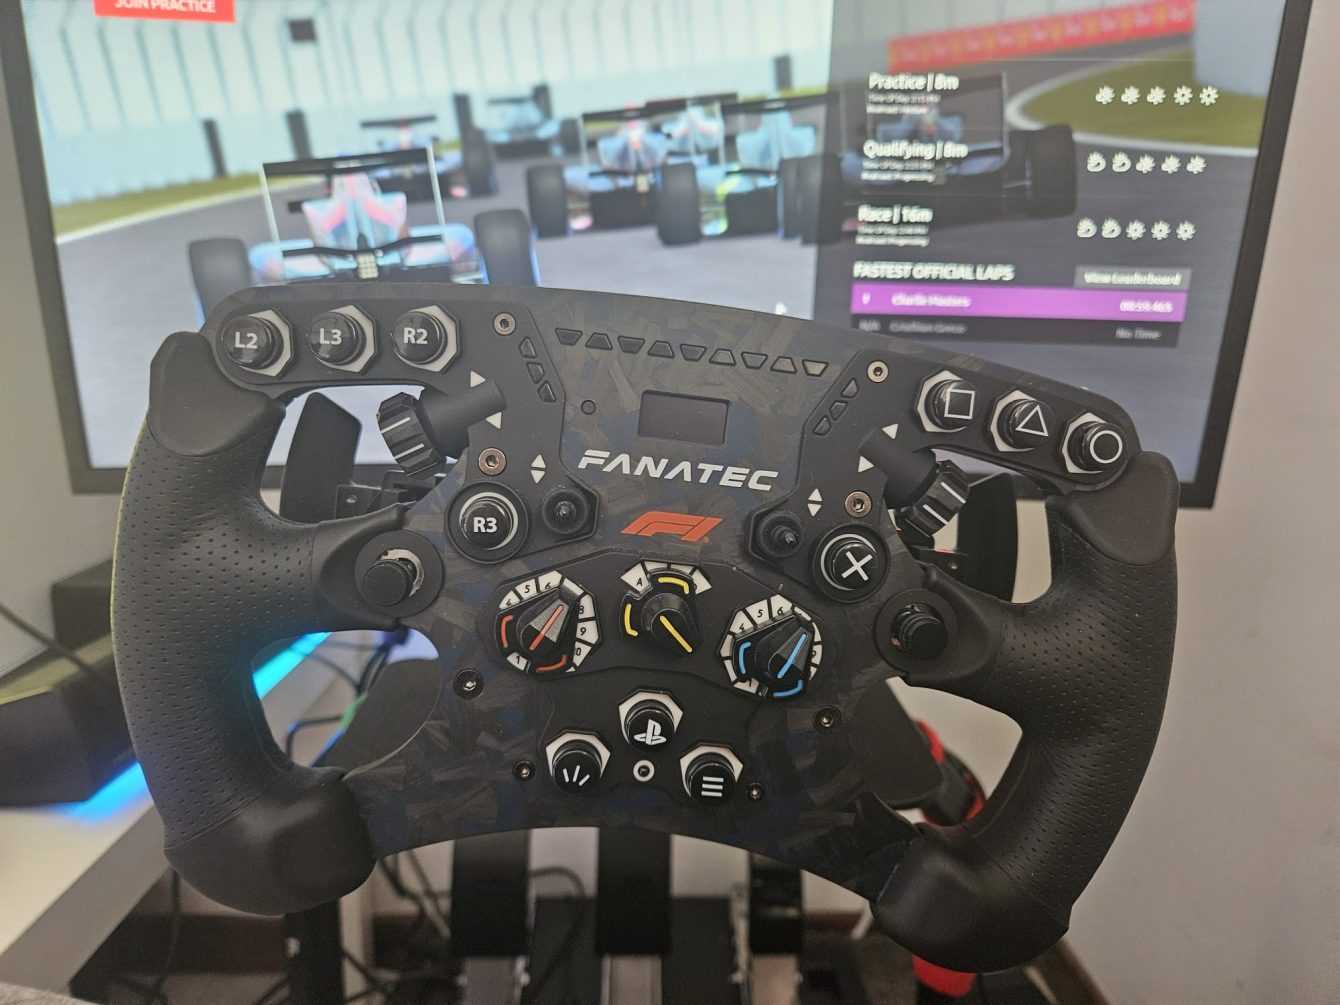 Fanatec Clubsport Racing Wheel F1 review: a new lightning-fast bundle